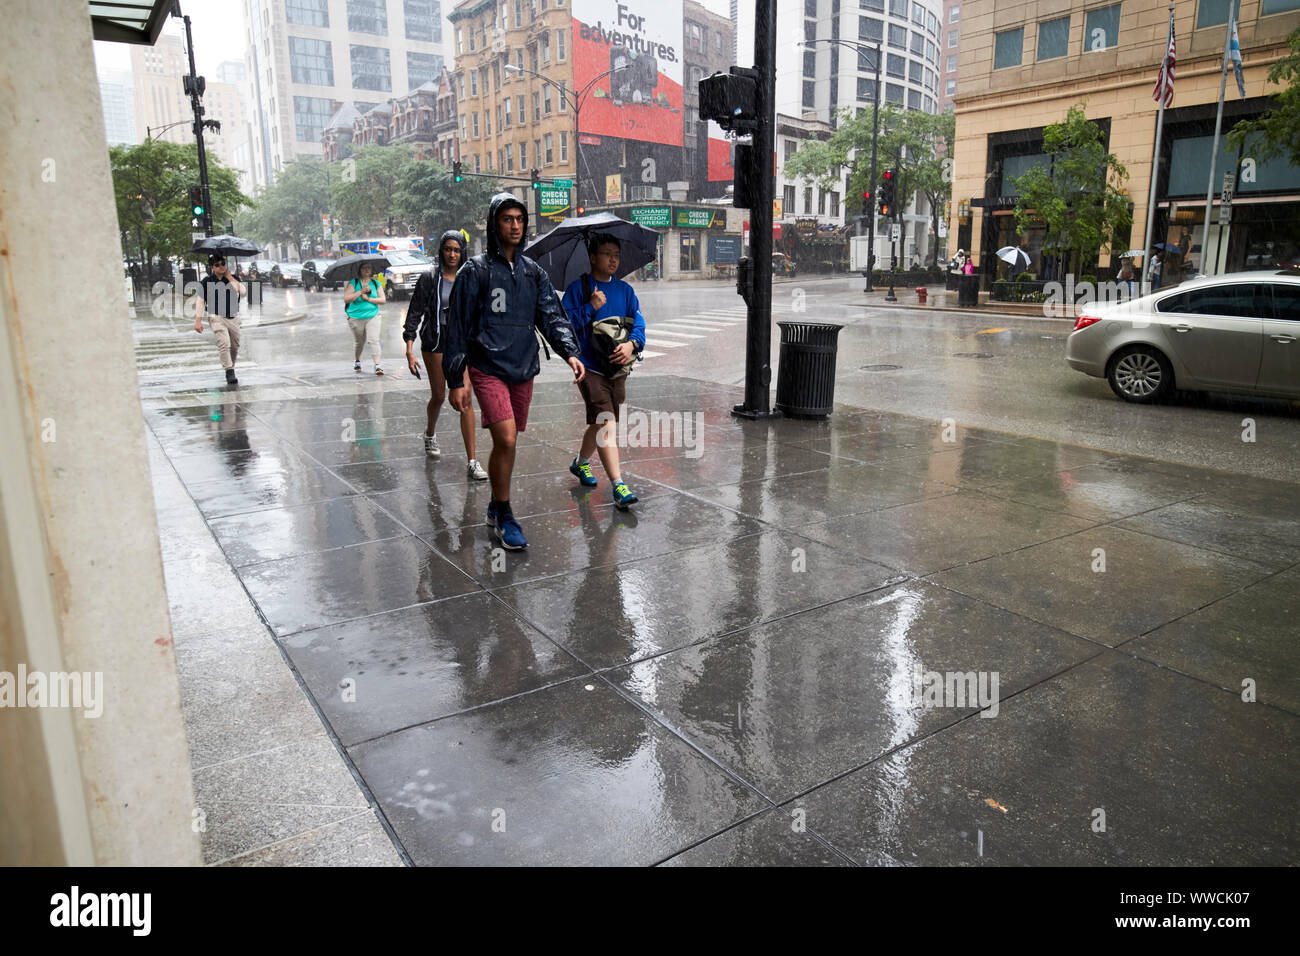 tourists and people walking through torrential rain falling on sidewalk in downtown Chicago Illinois USA Stock Photo